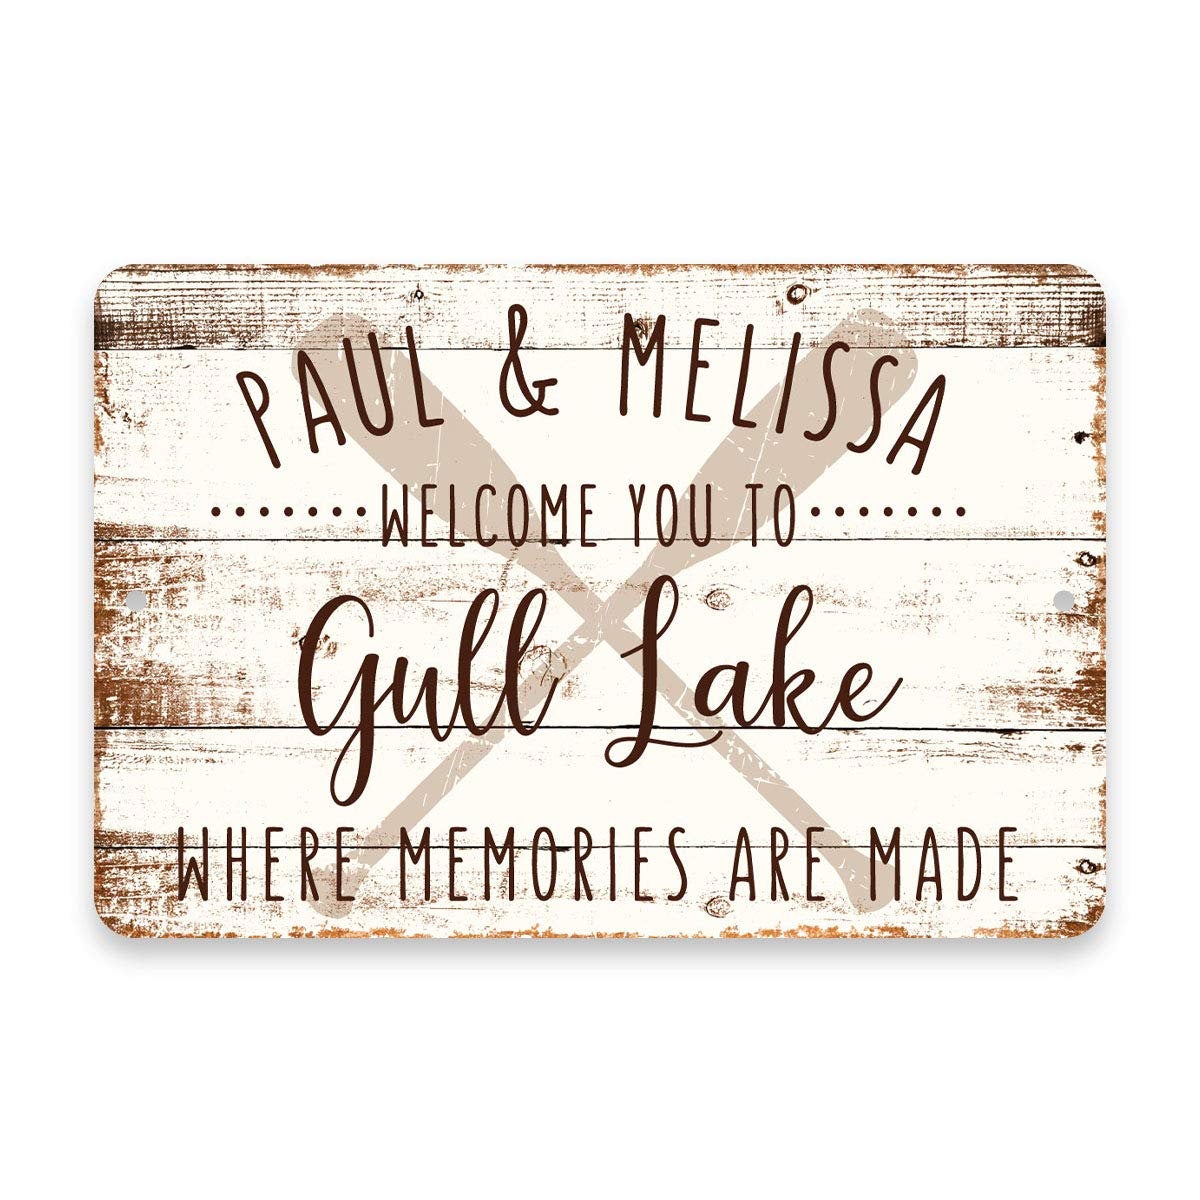 Personalized Welcome to Gull Lake Where Memories are Made Sign - 8 X 12 Metal Sign with Wood Look